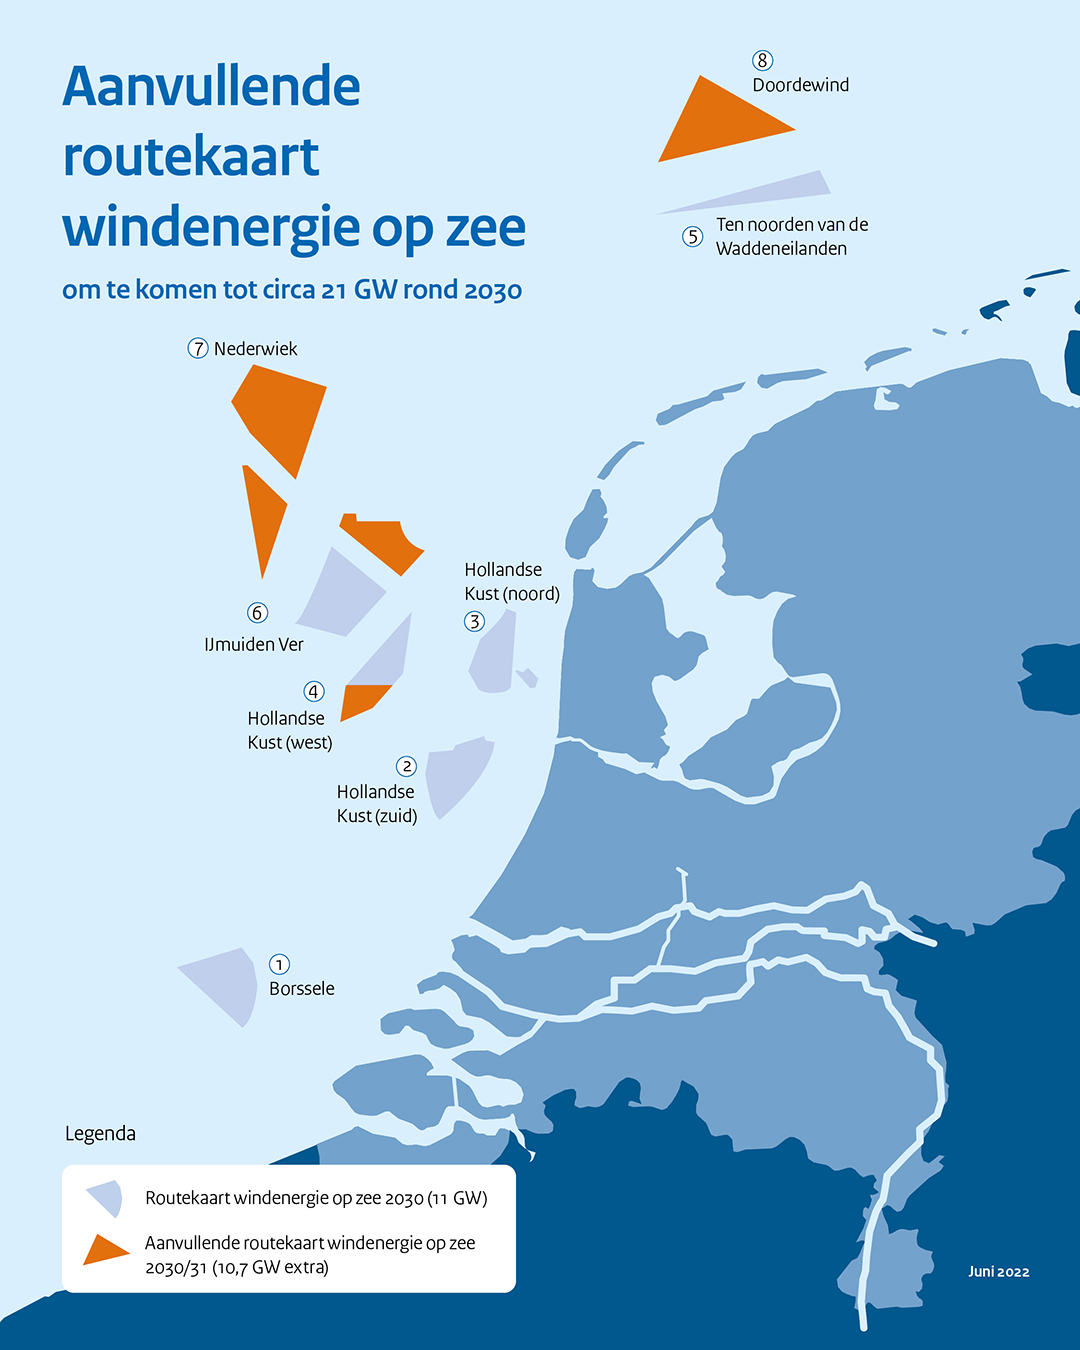 An image mapping next offshore wind areas to be tendered in the Netherlands